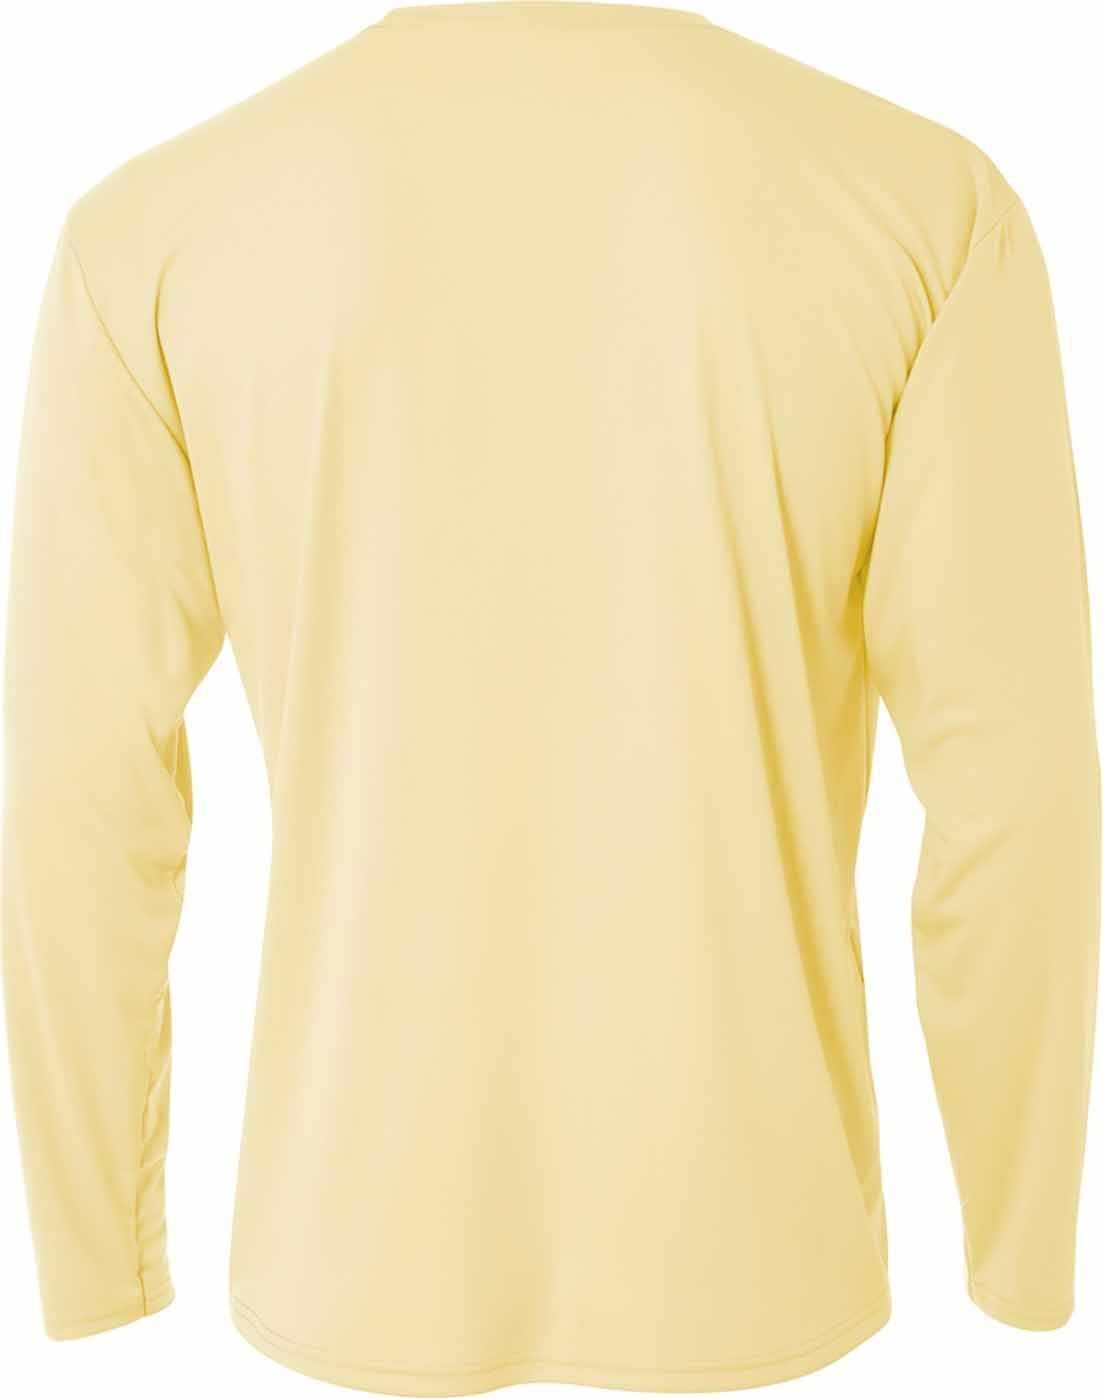 A4 NB3165 Youth Long Sleeve Cooling Performance Crew T-Shirt - Light Y